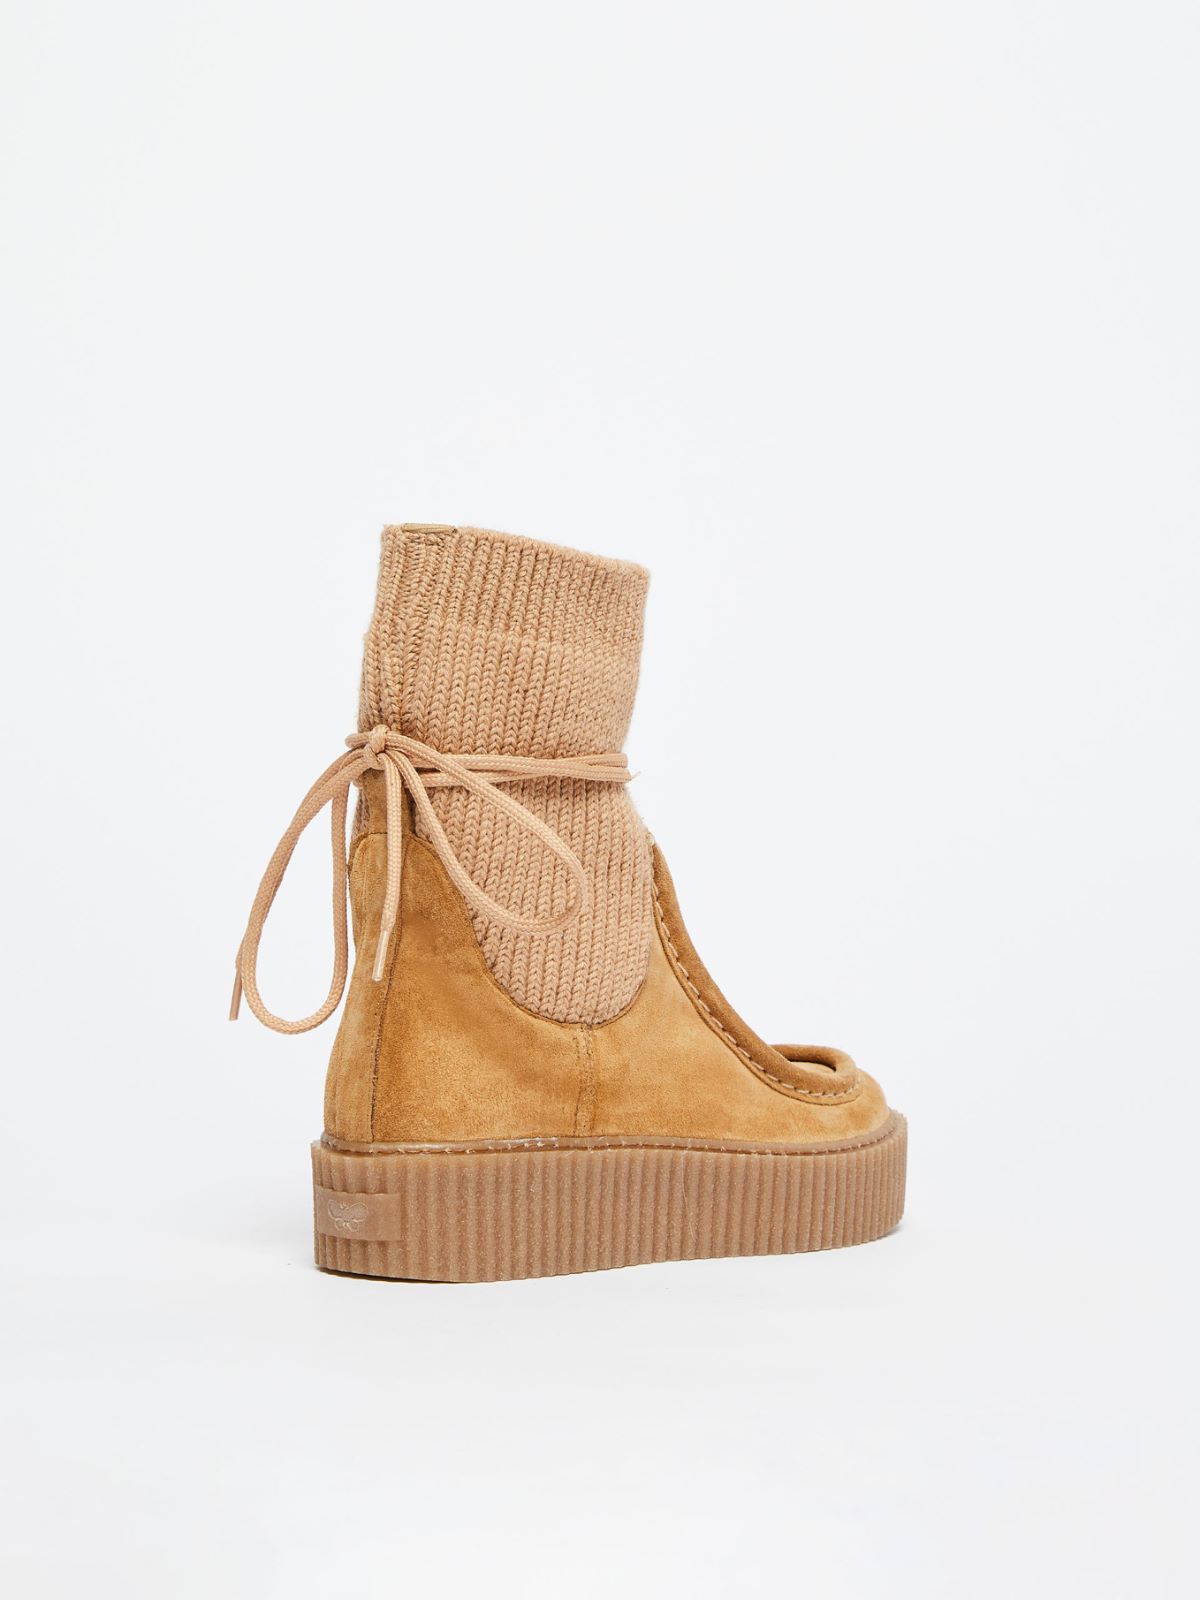 Split leather and knit ankle boots - MUSTARD - Weekend Max Mara - 3